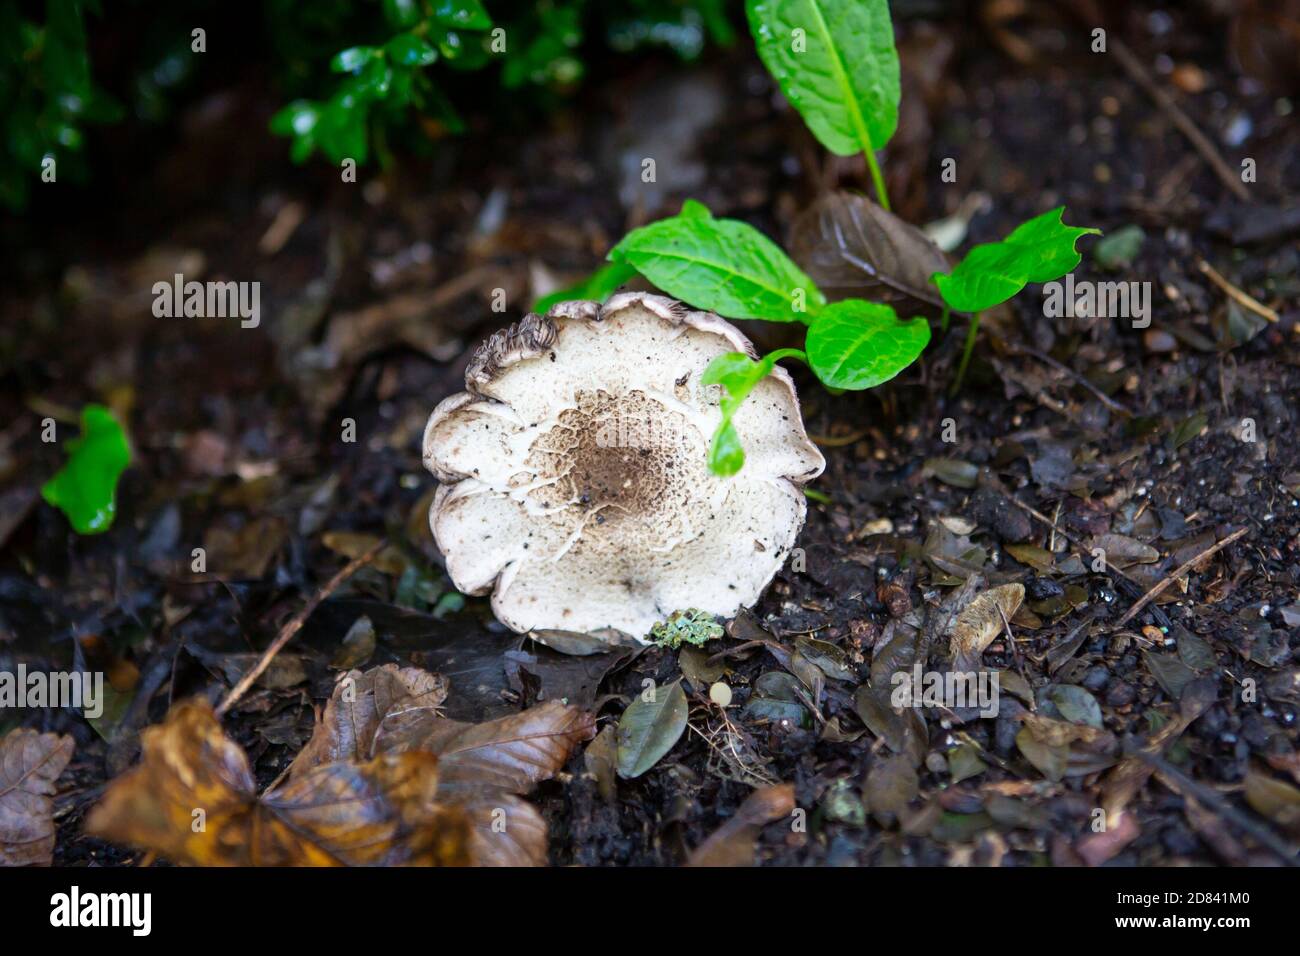 Aerial view of a wild mushroom Stock Photo